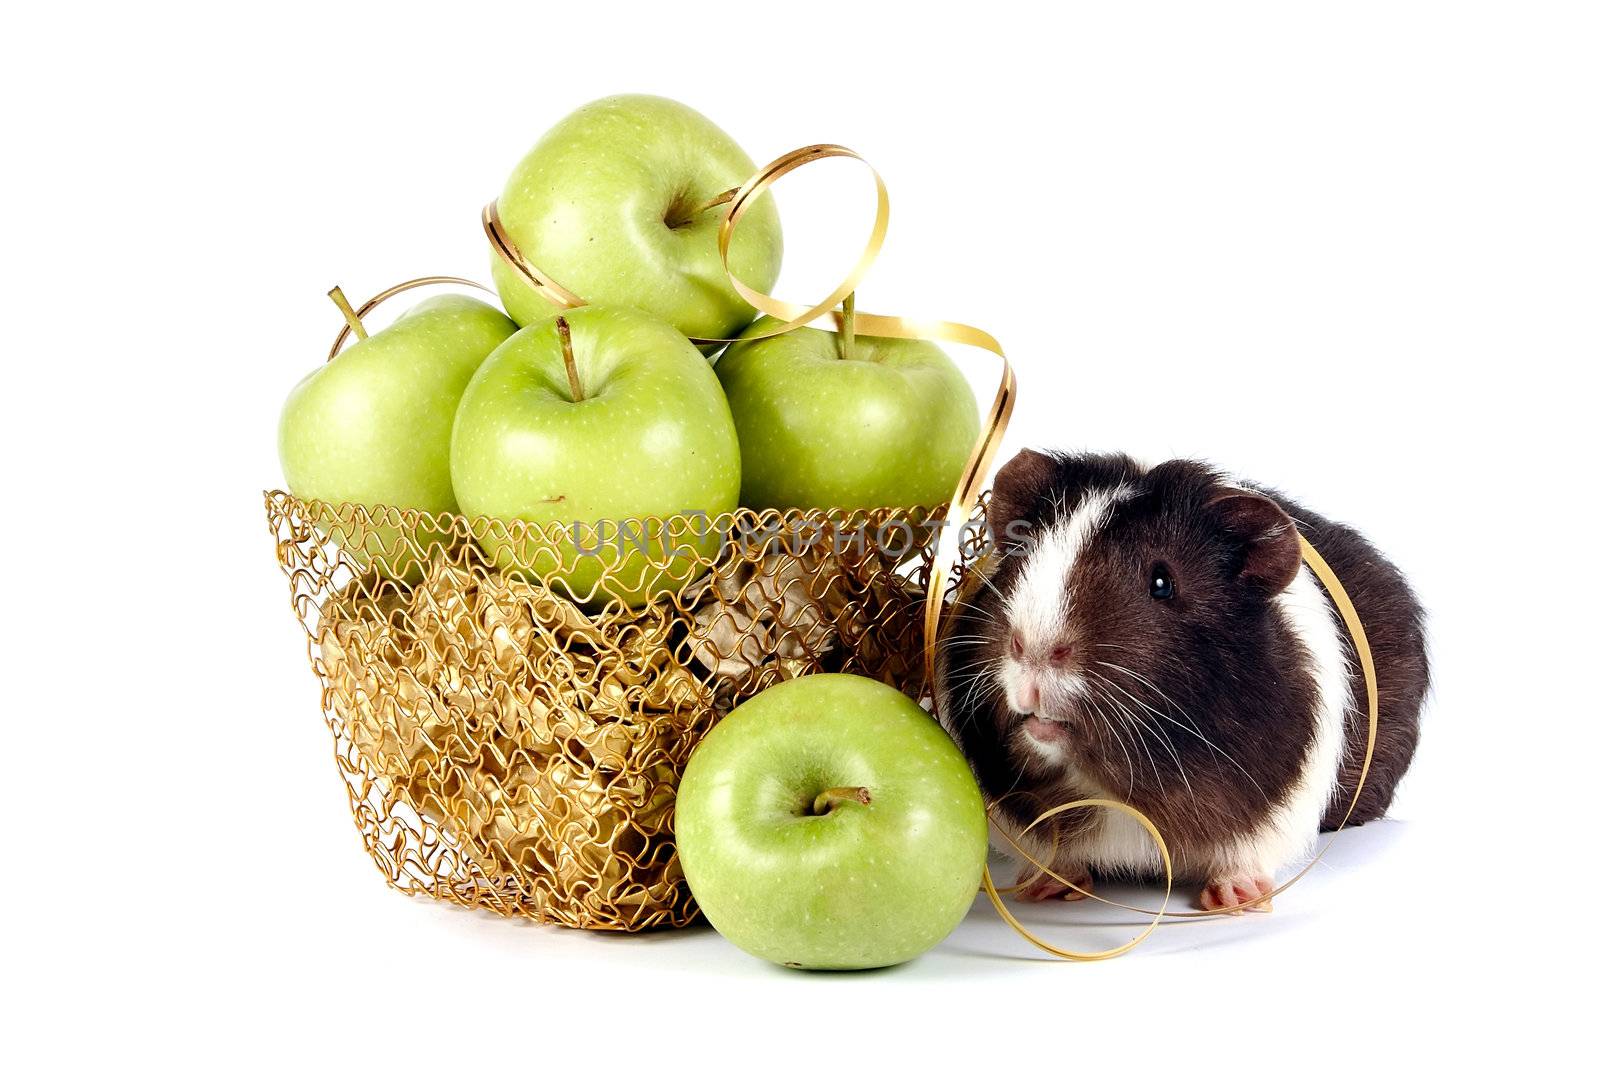 Guinea pigs with apples in a gold basket on a white background